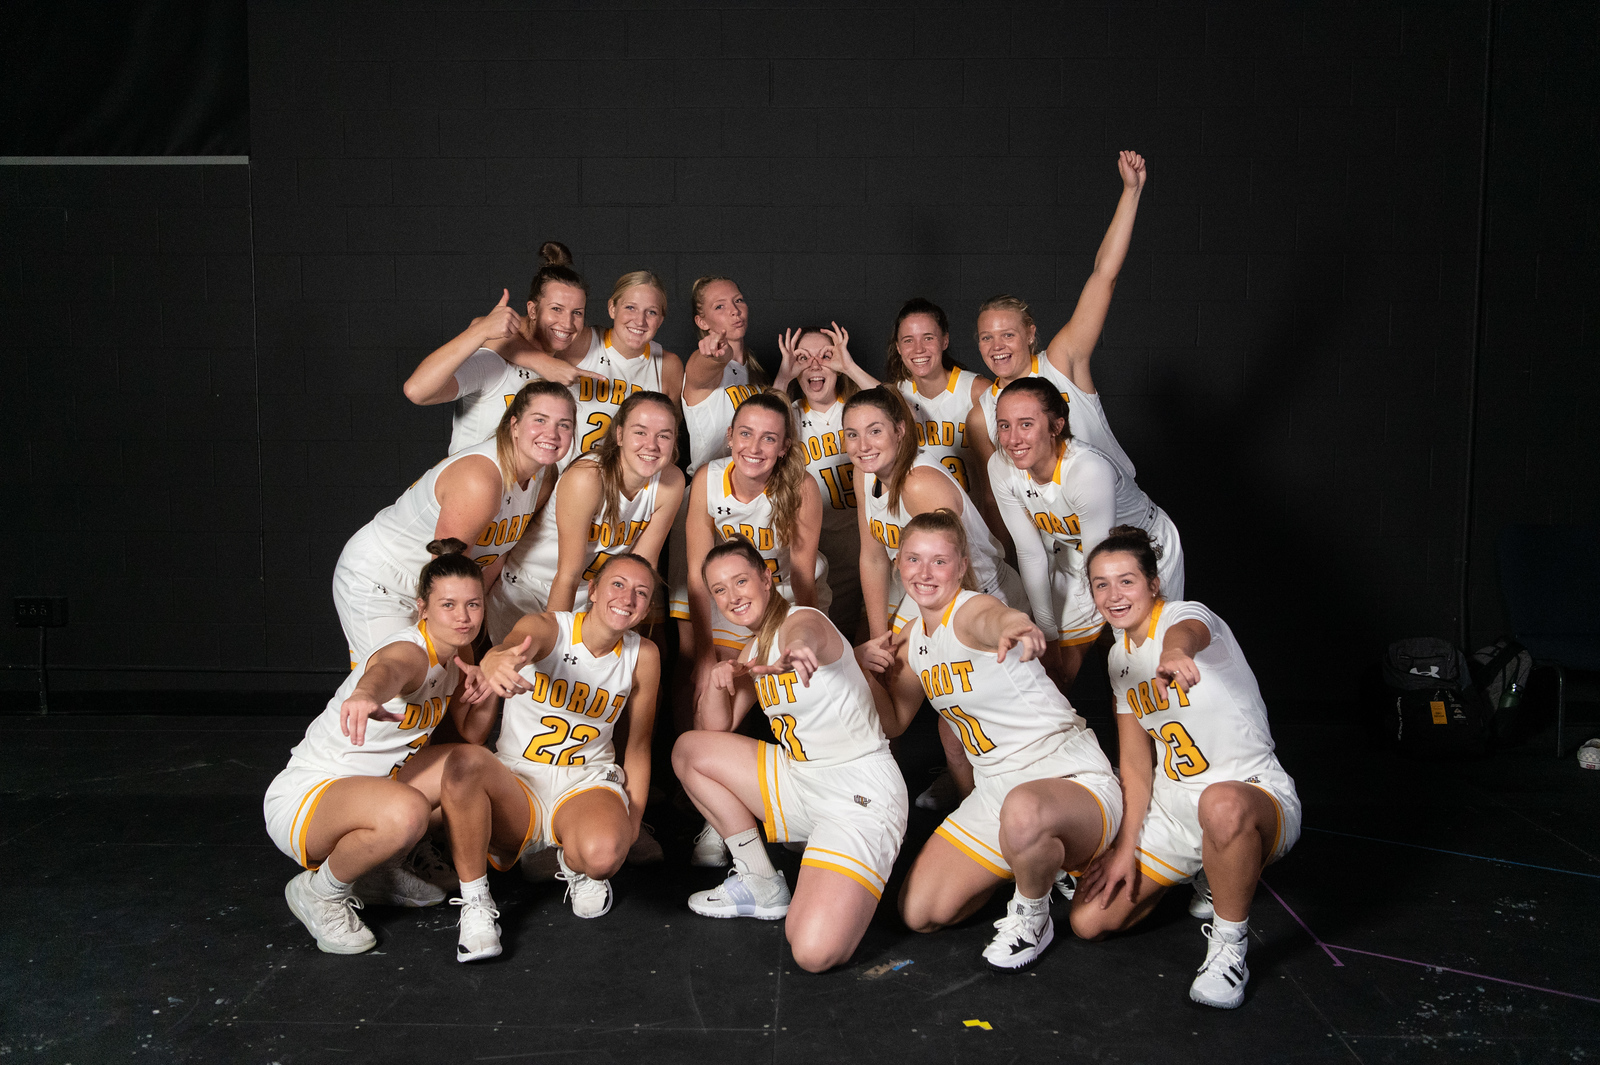 Dordt's women's basketball team poses for a picture